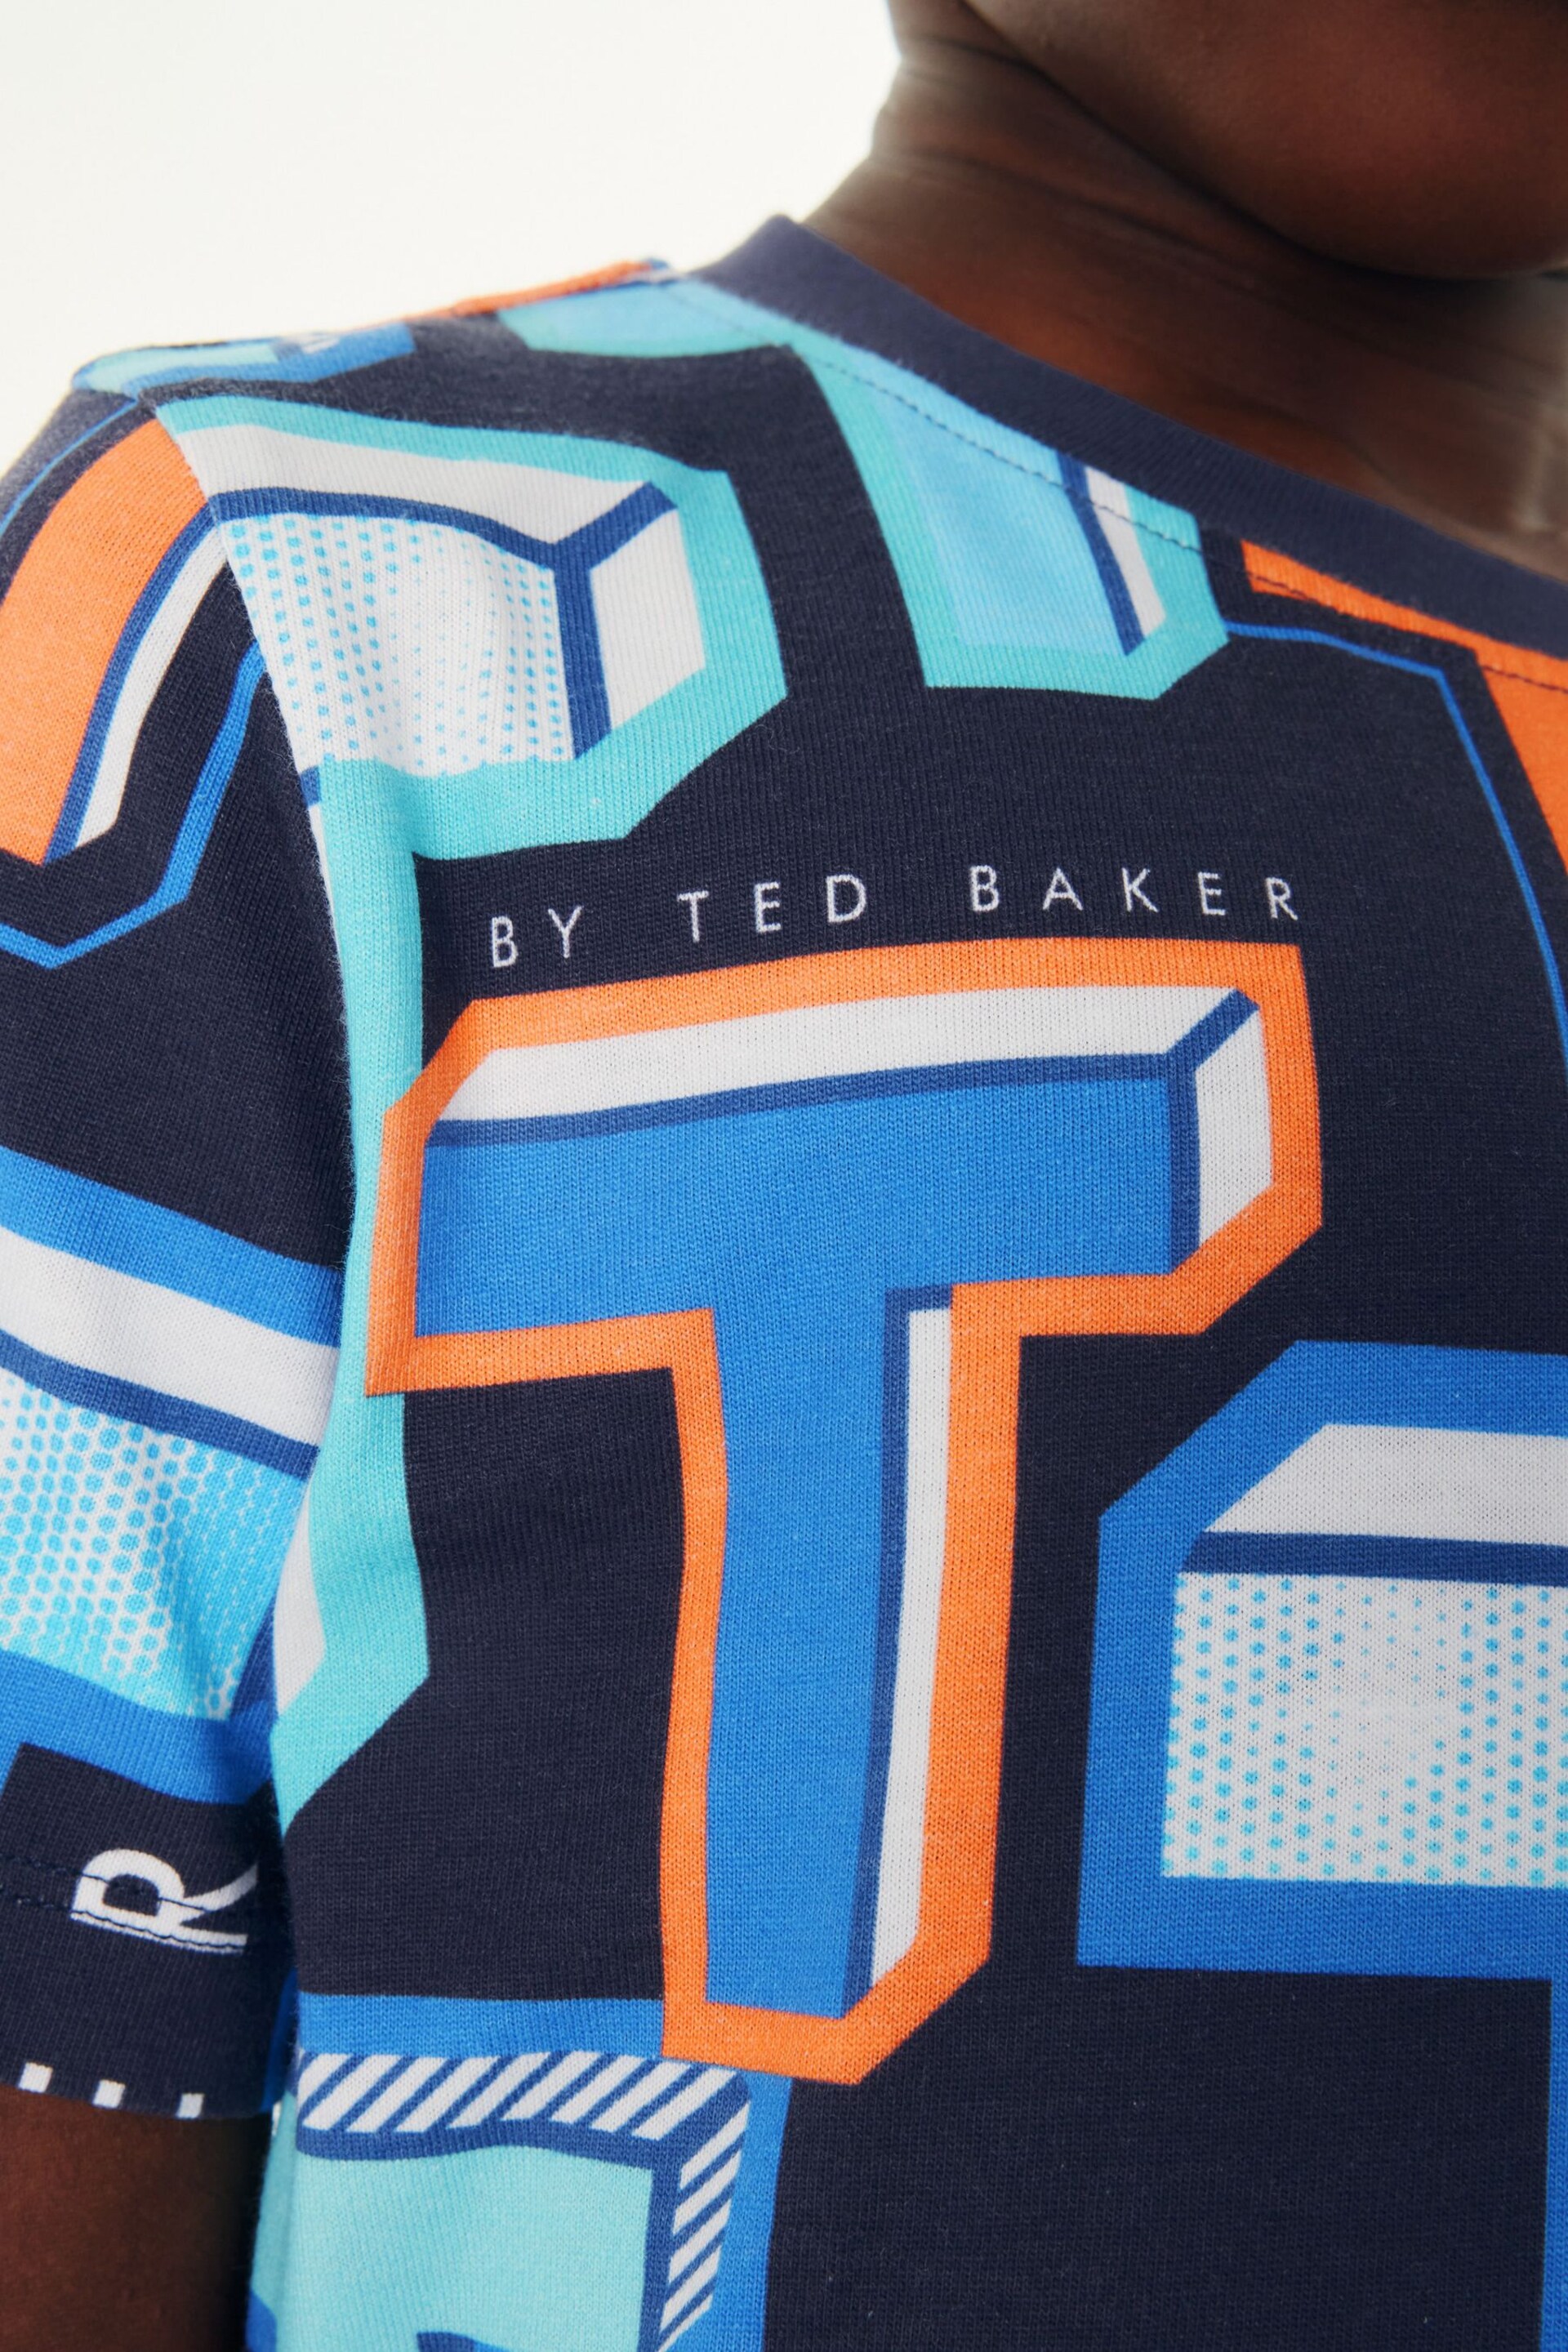 Baker by Ted Baker Graphic T-Shirt - Image 6 of 9